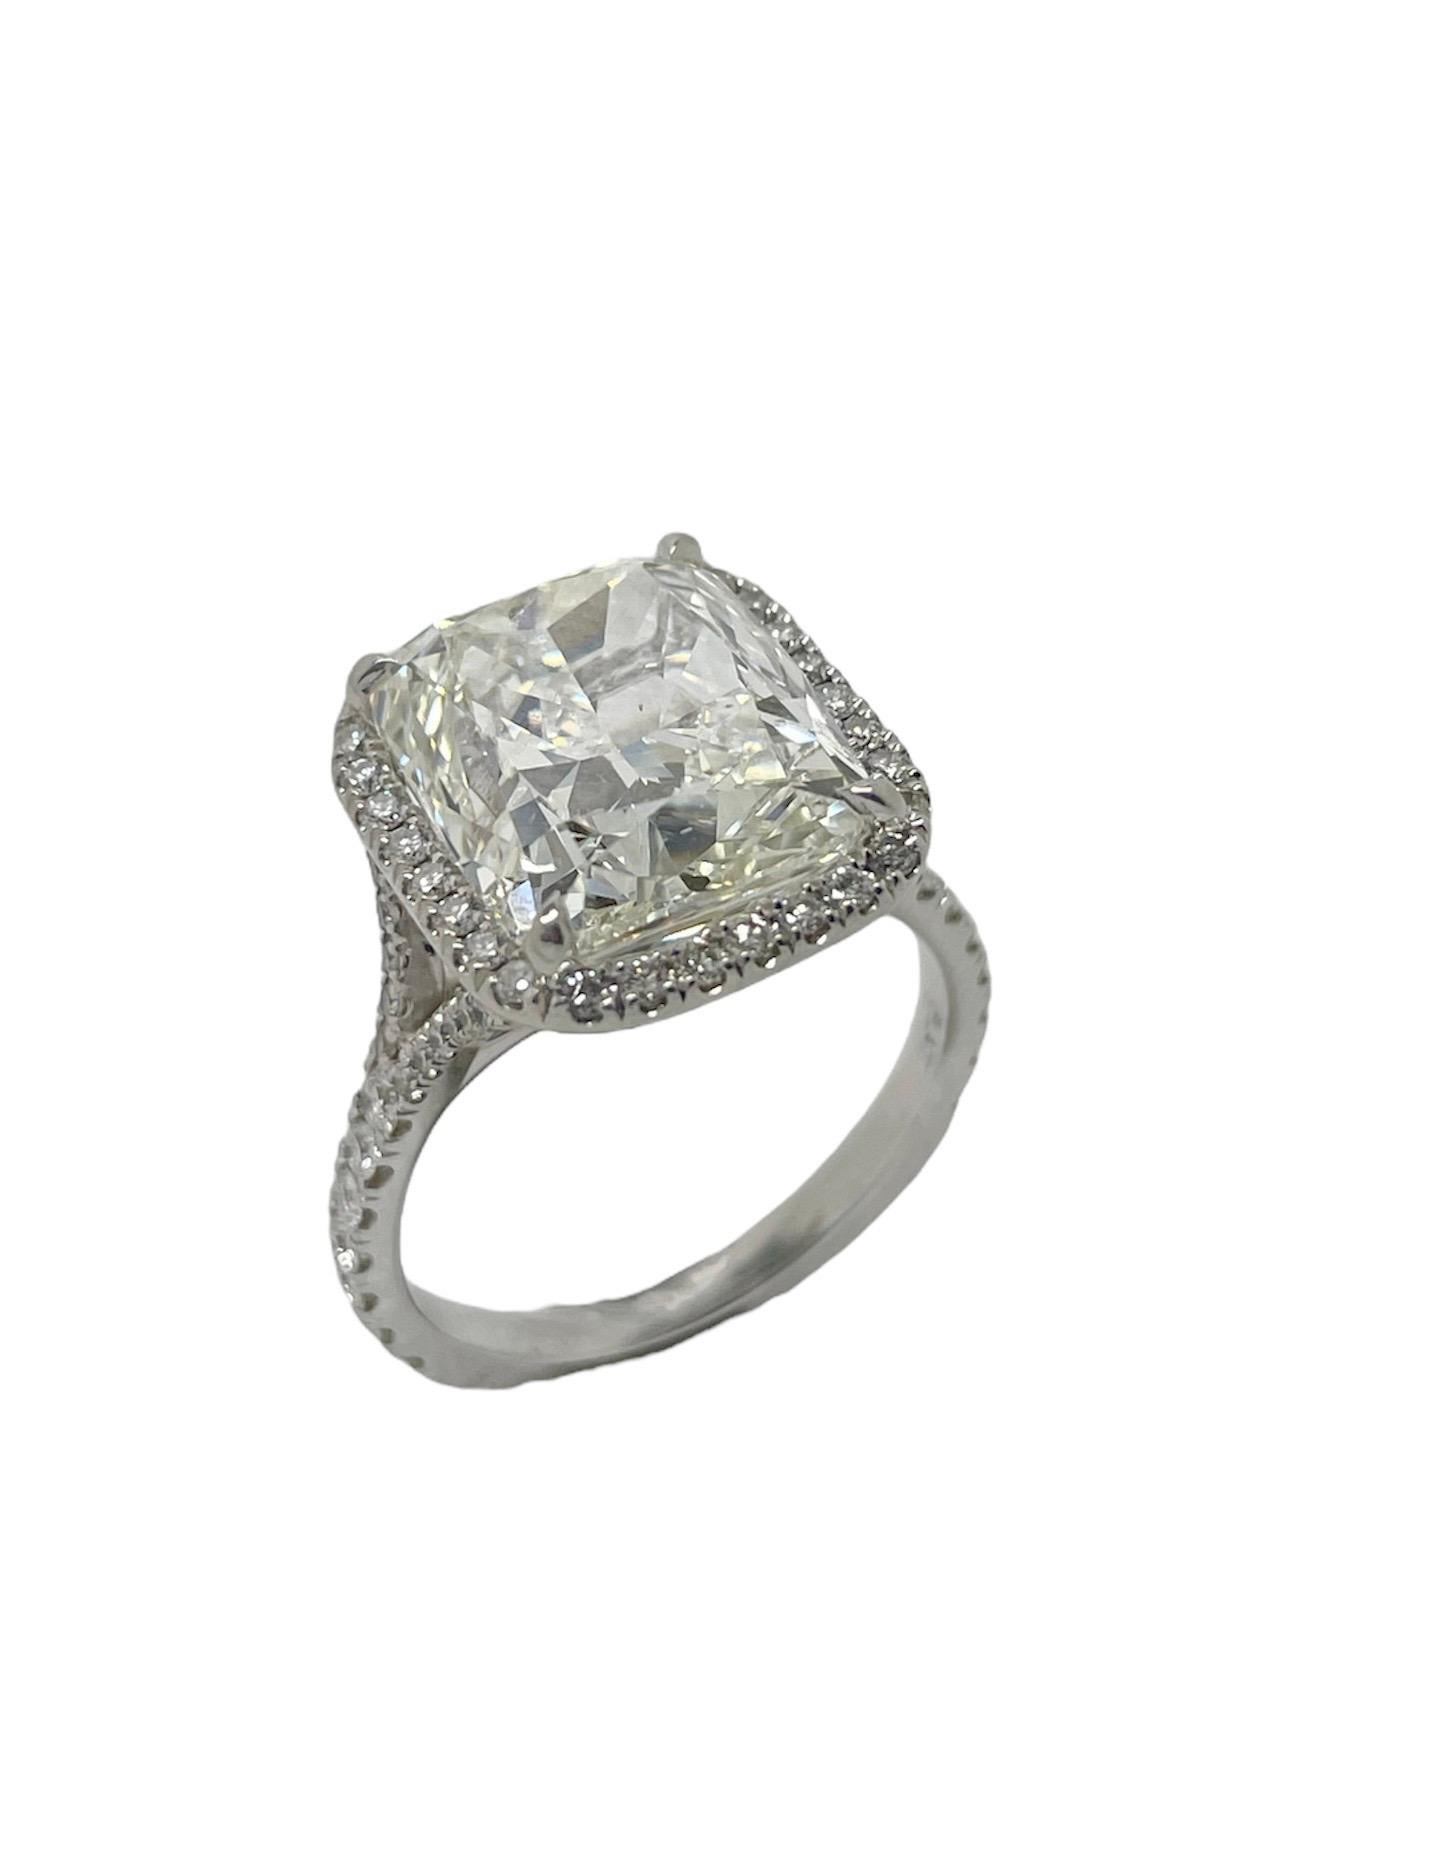 This absolutely stunning ring features a 8.02 carat cushion modified brilliant cut diamond with J color and SI1 clarity, surrounded by 68 round brilliant cut diamonds weighing approximately 1.16 carats total. Mounted in platinum and skillfully